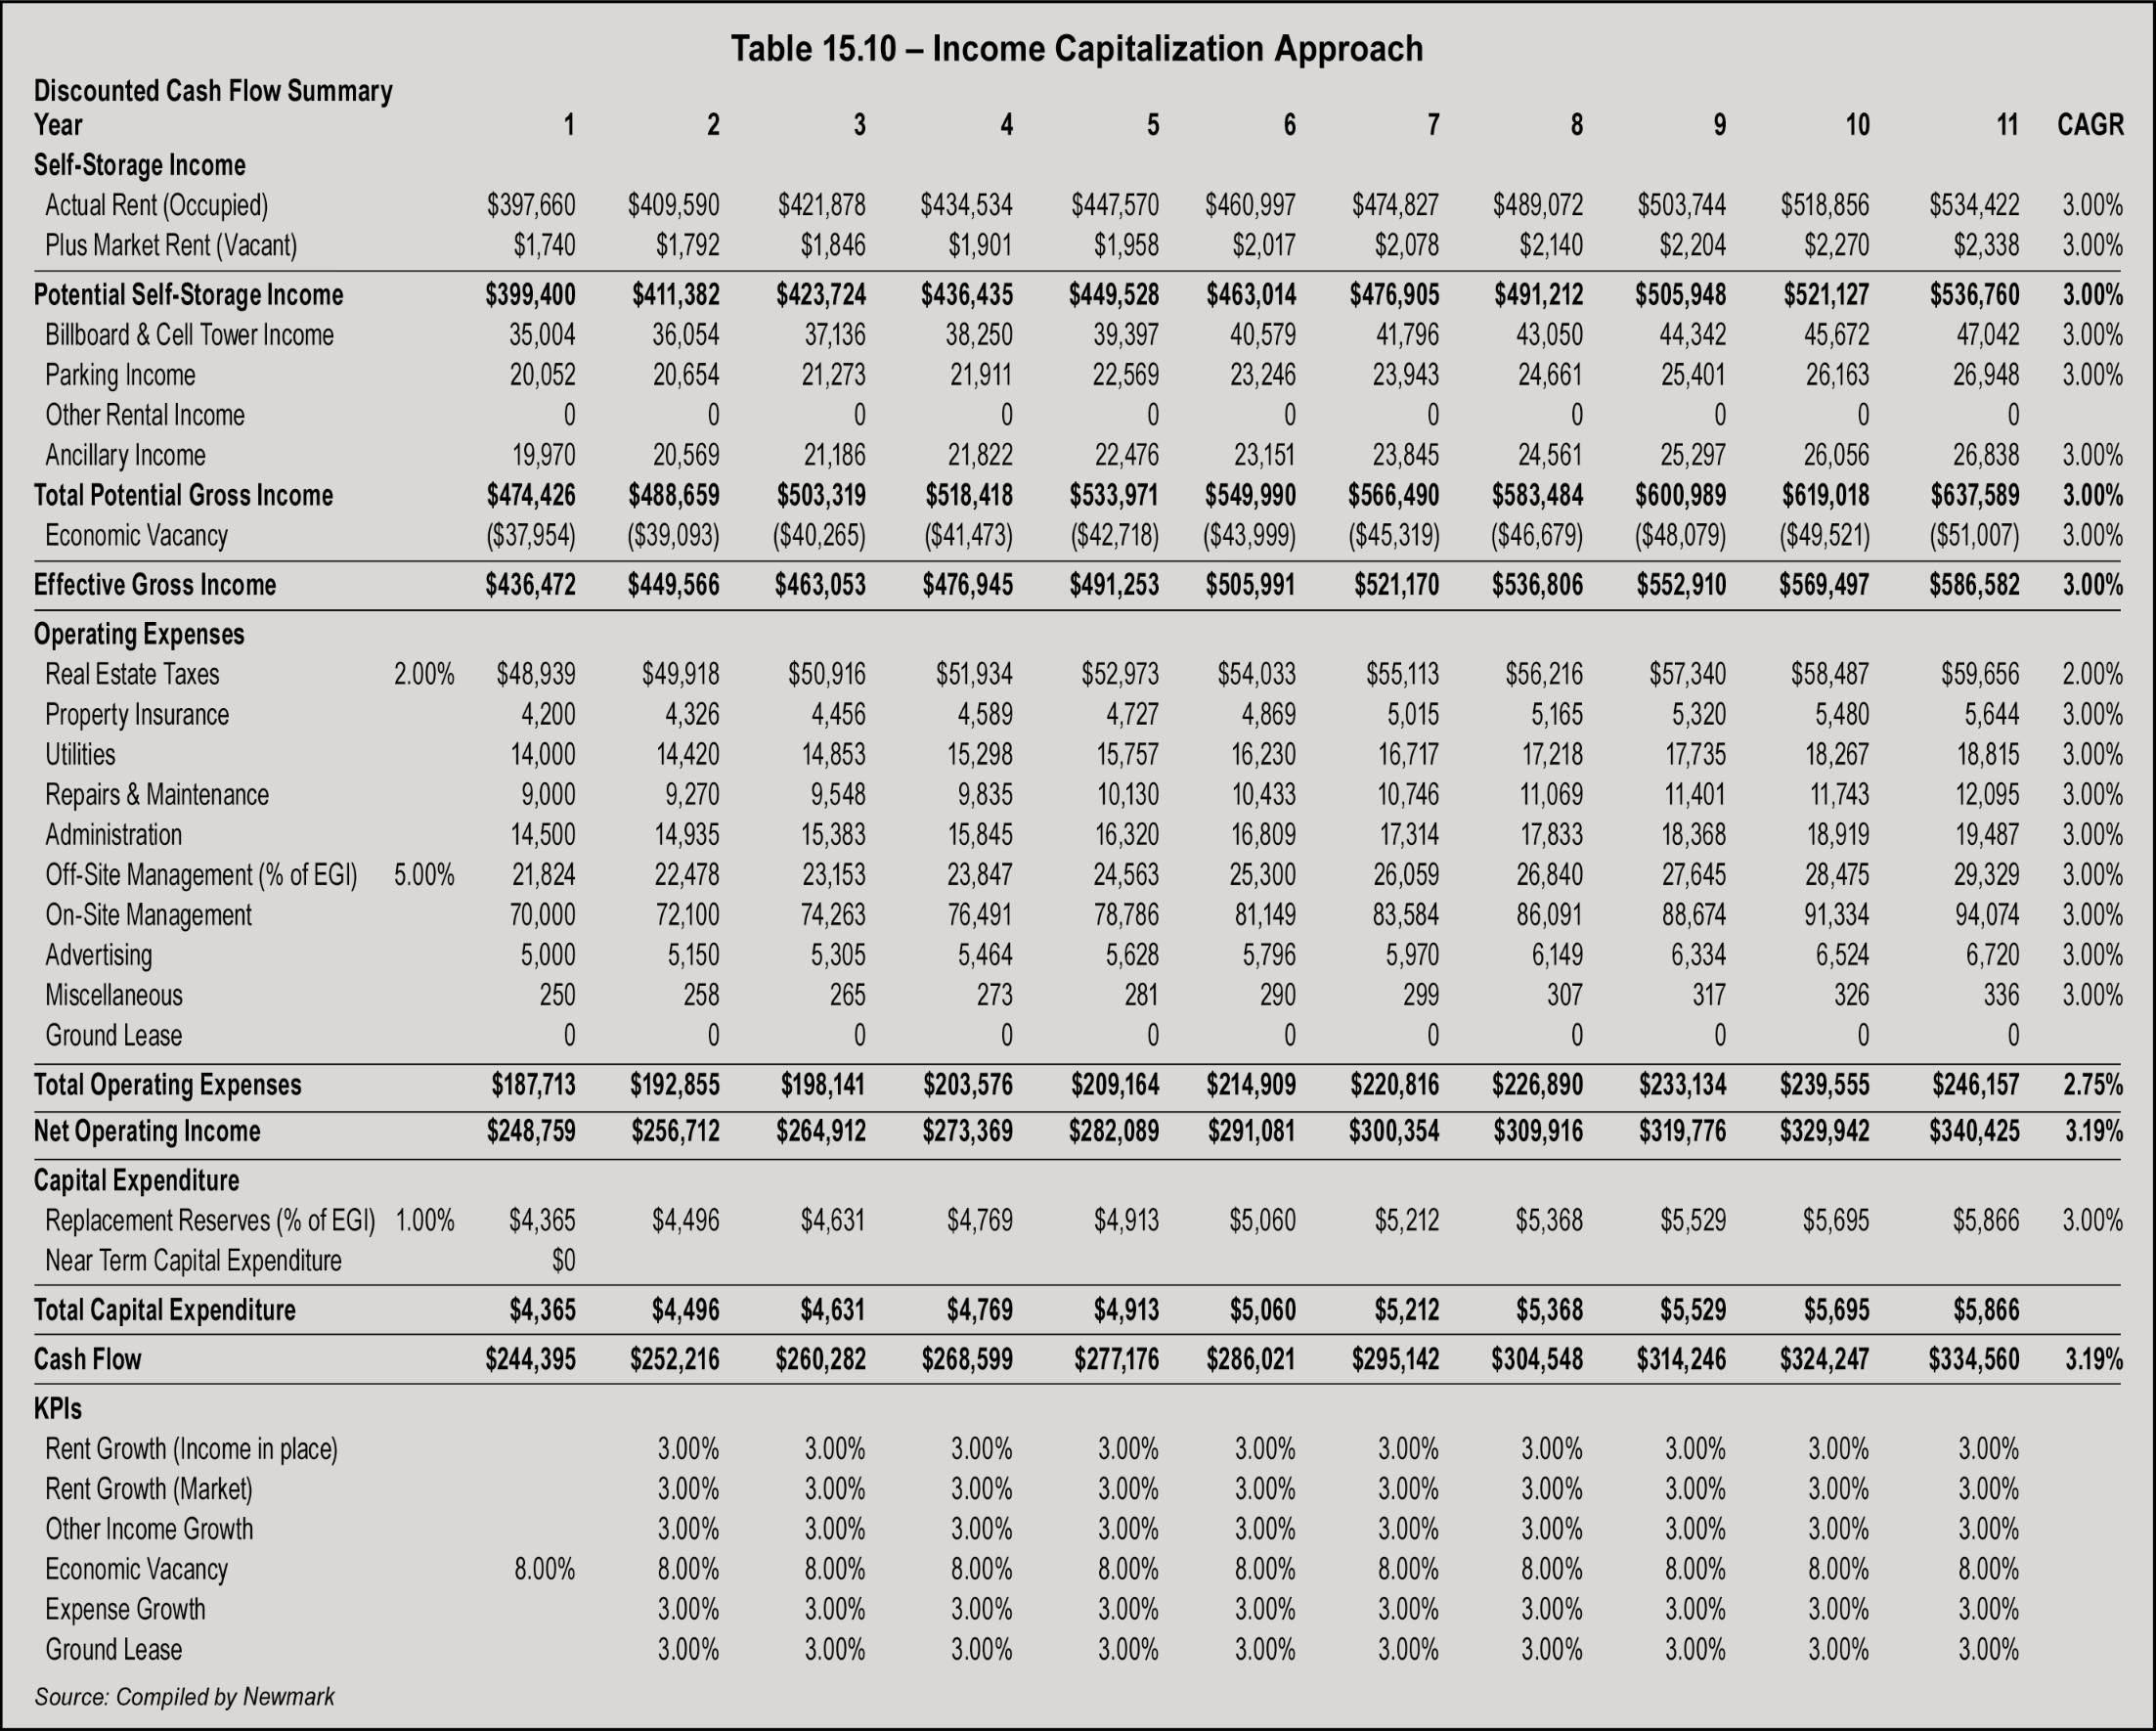 Table 15.10 - Income Capitalization Approach